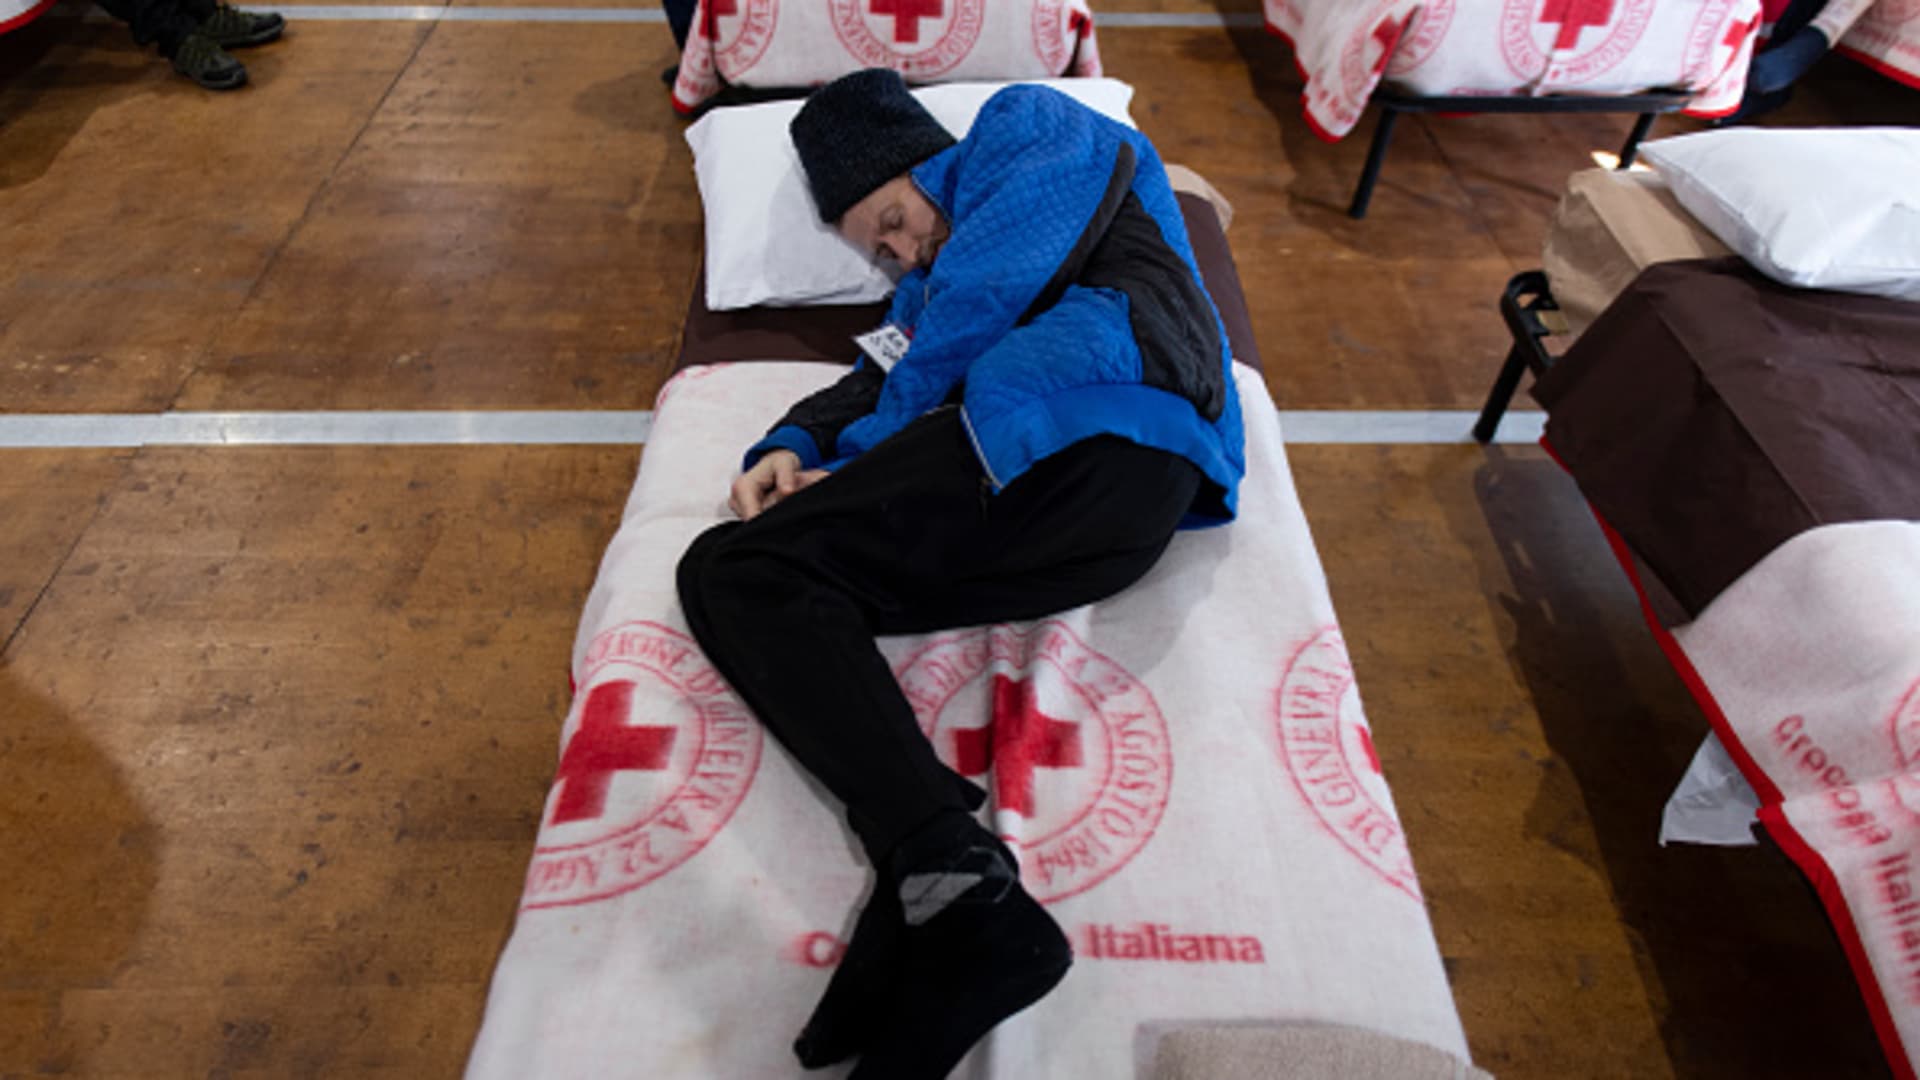 Ukrainian refugee sleeps on a bed inside the Red Cross Headquarters on April 7, 2022 in Settimo Torinese near Turin, Italy. 